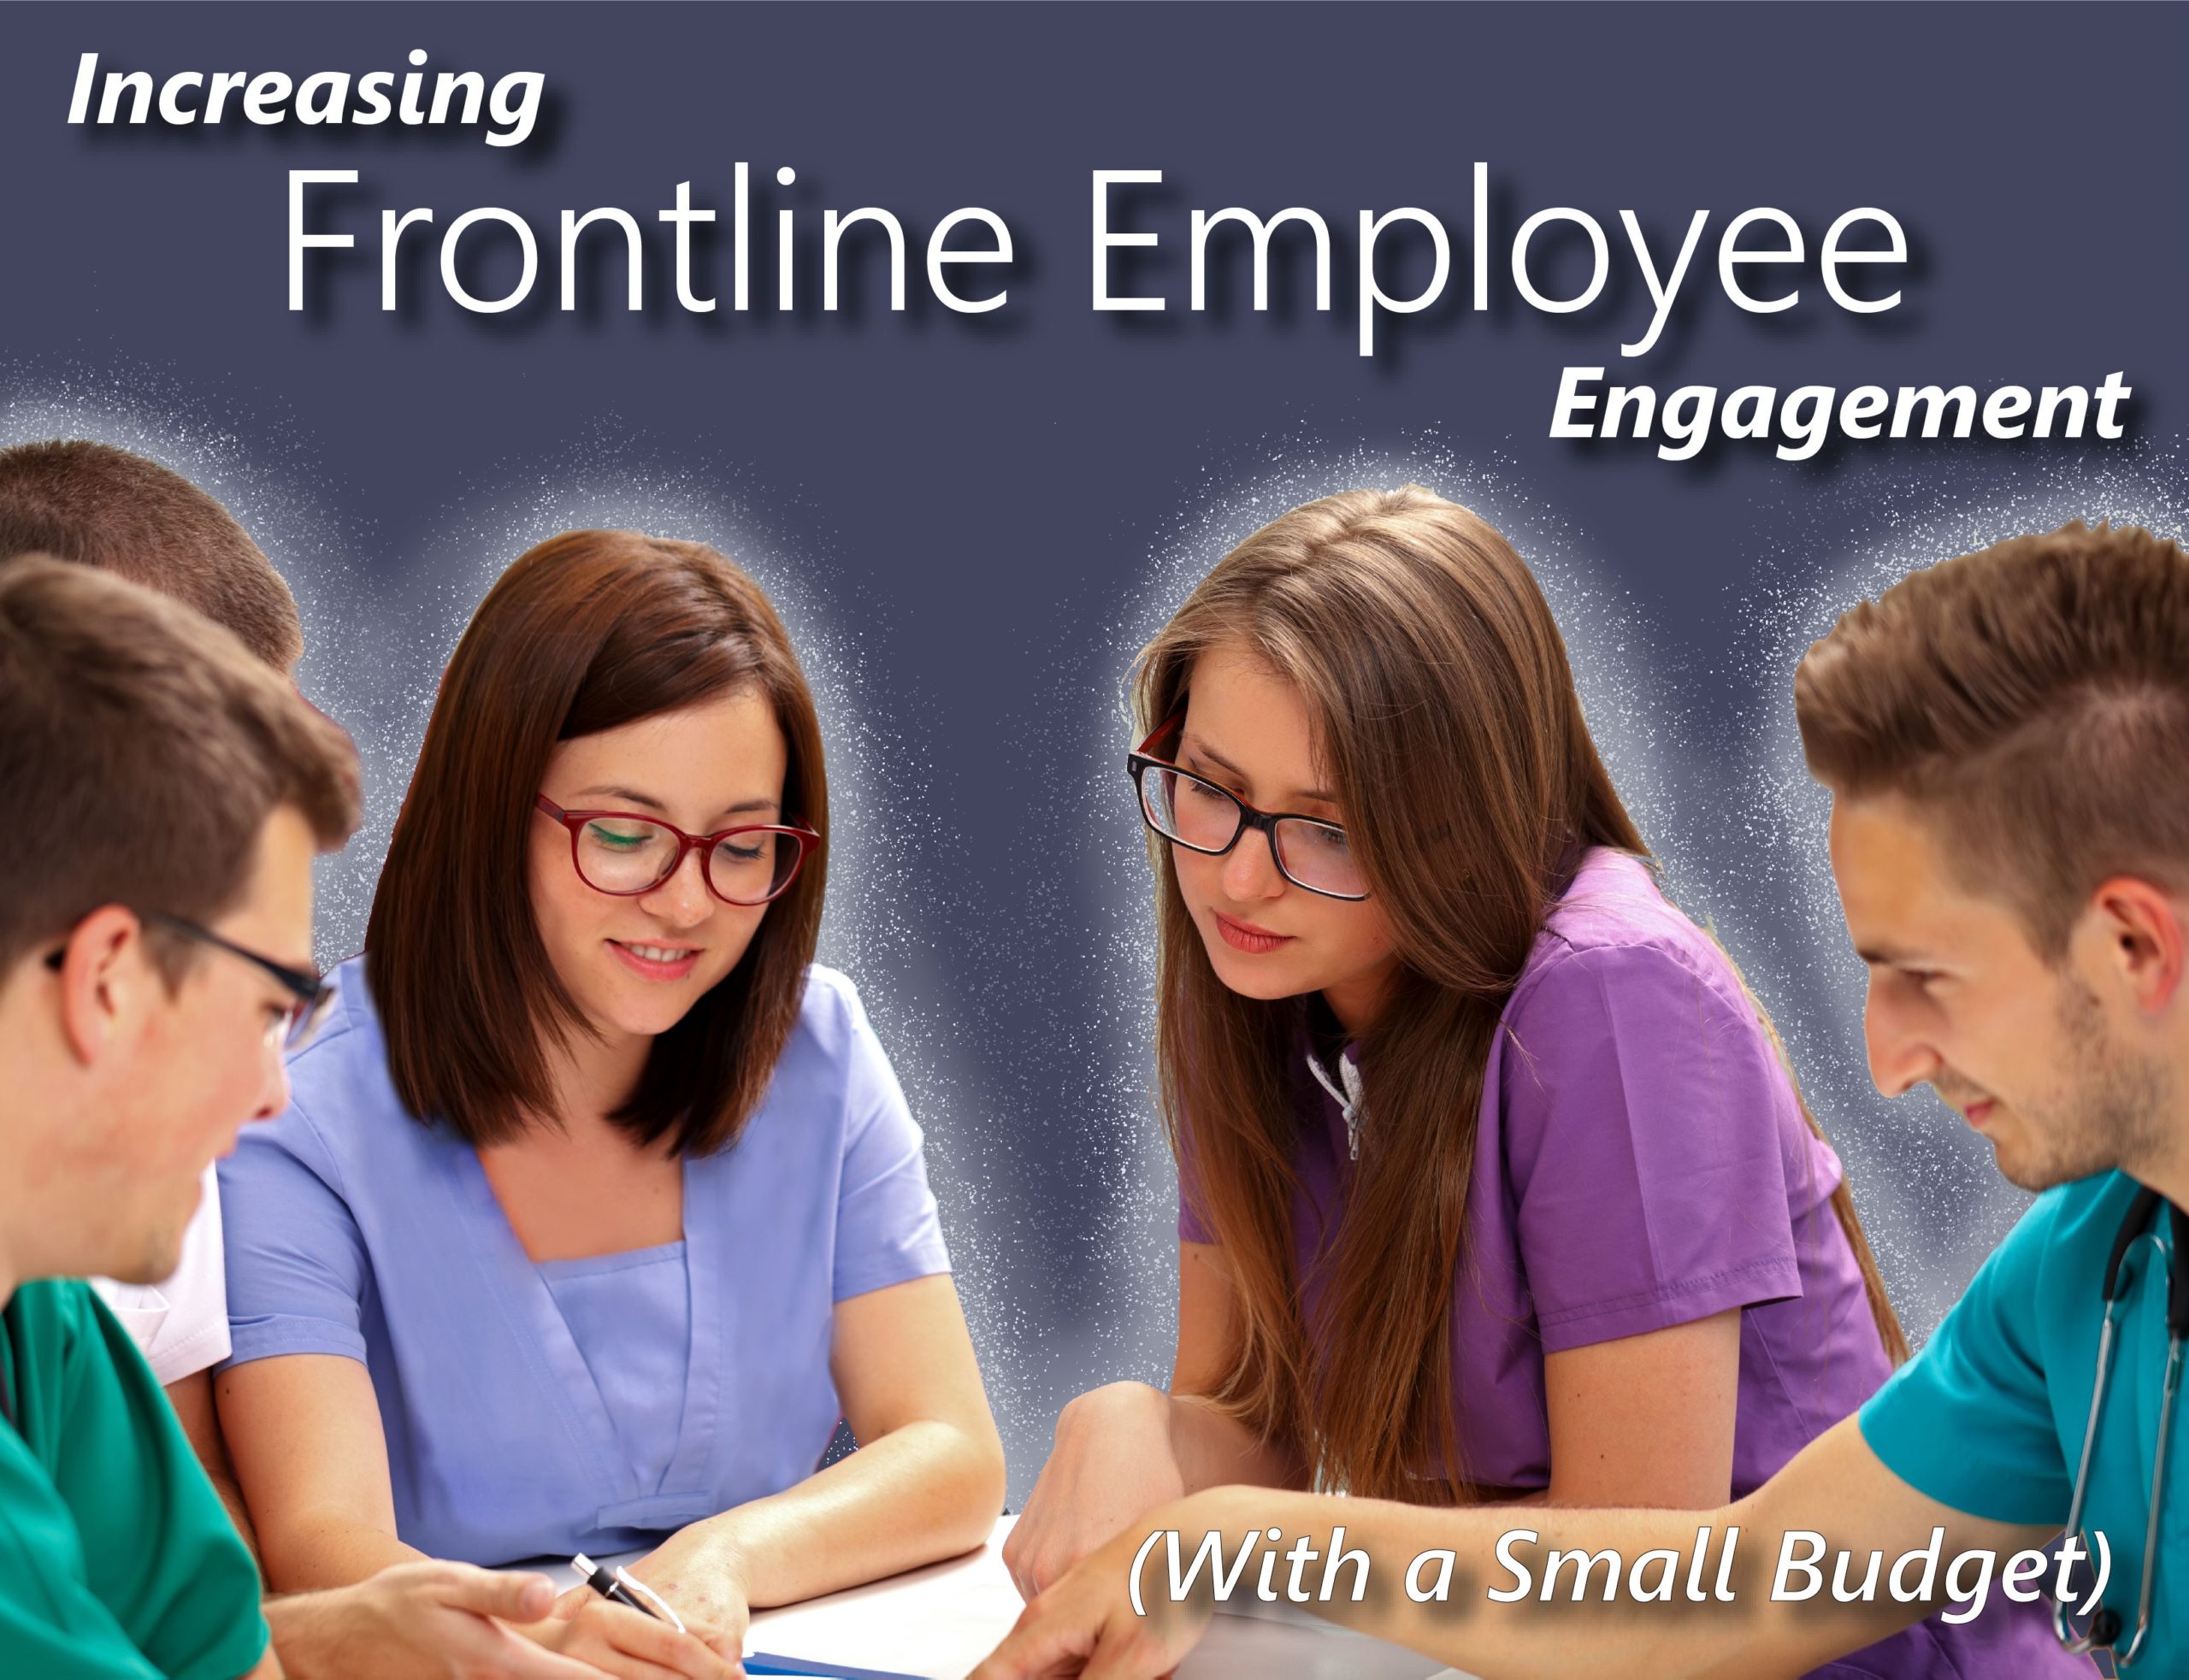 Increasing Frontline Employee Engagement (With a Small Budget)